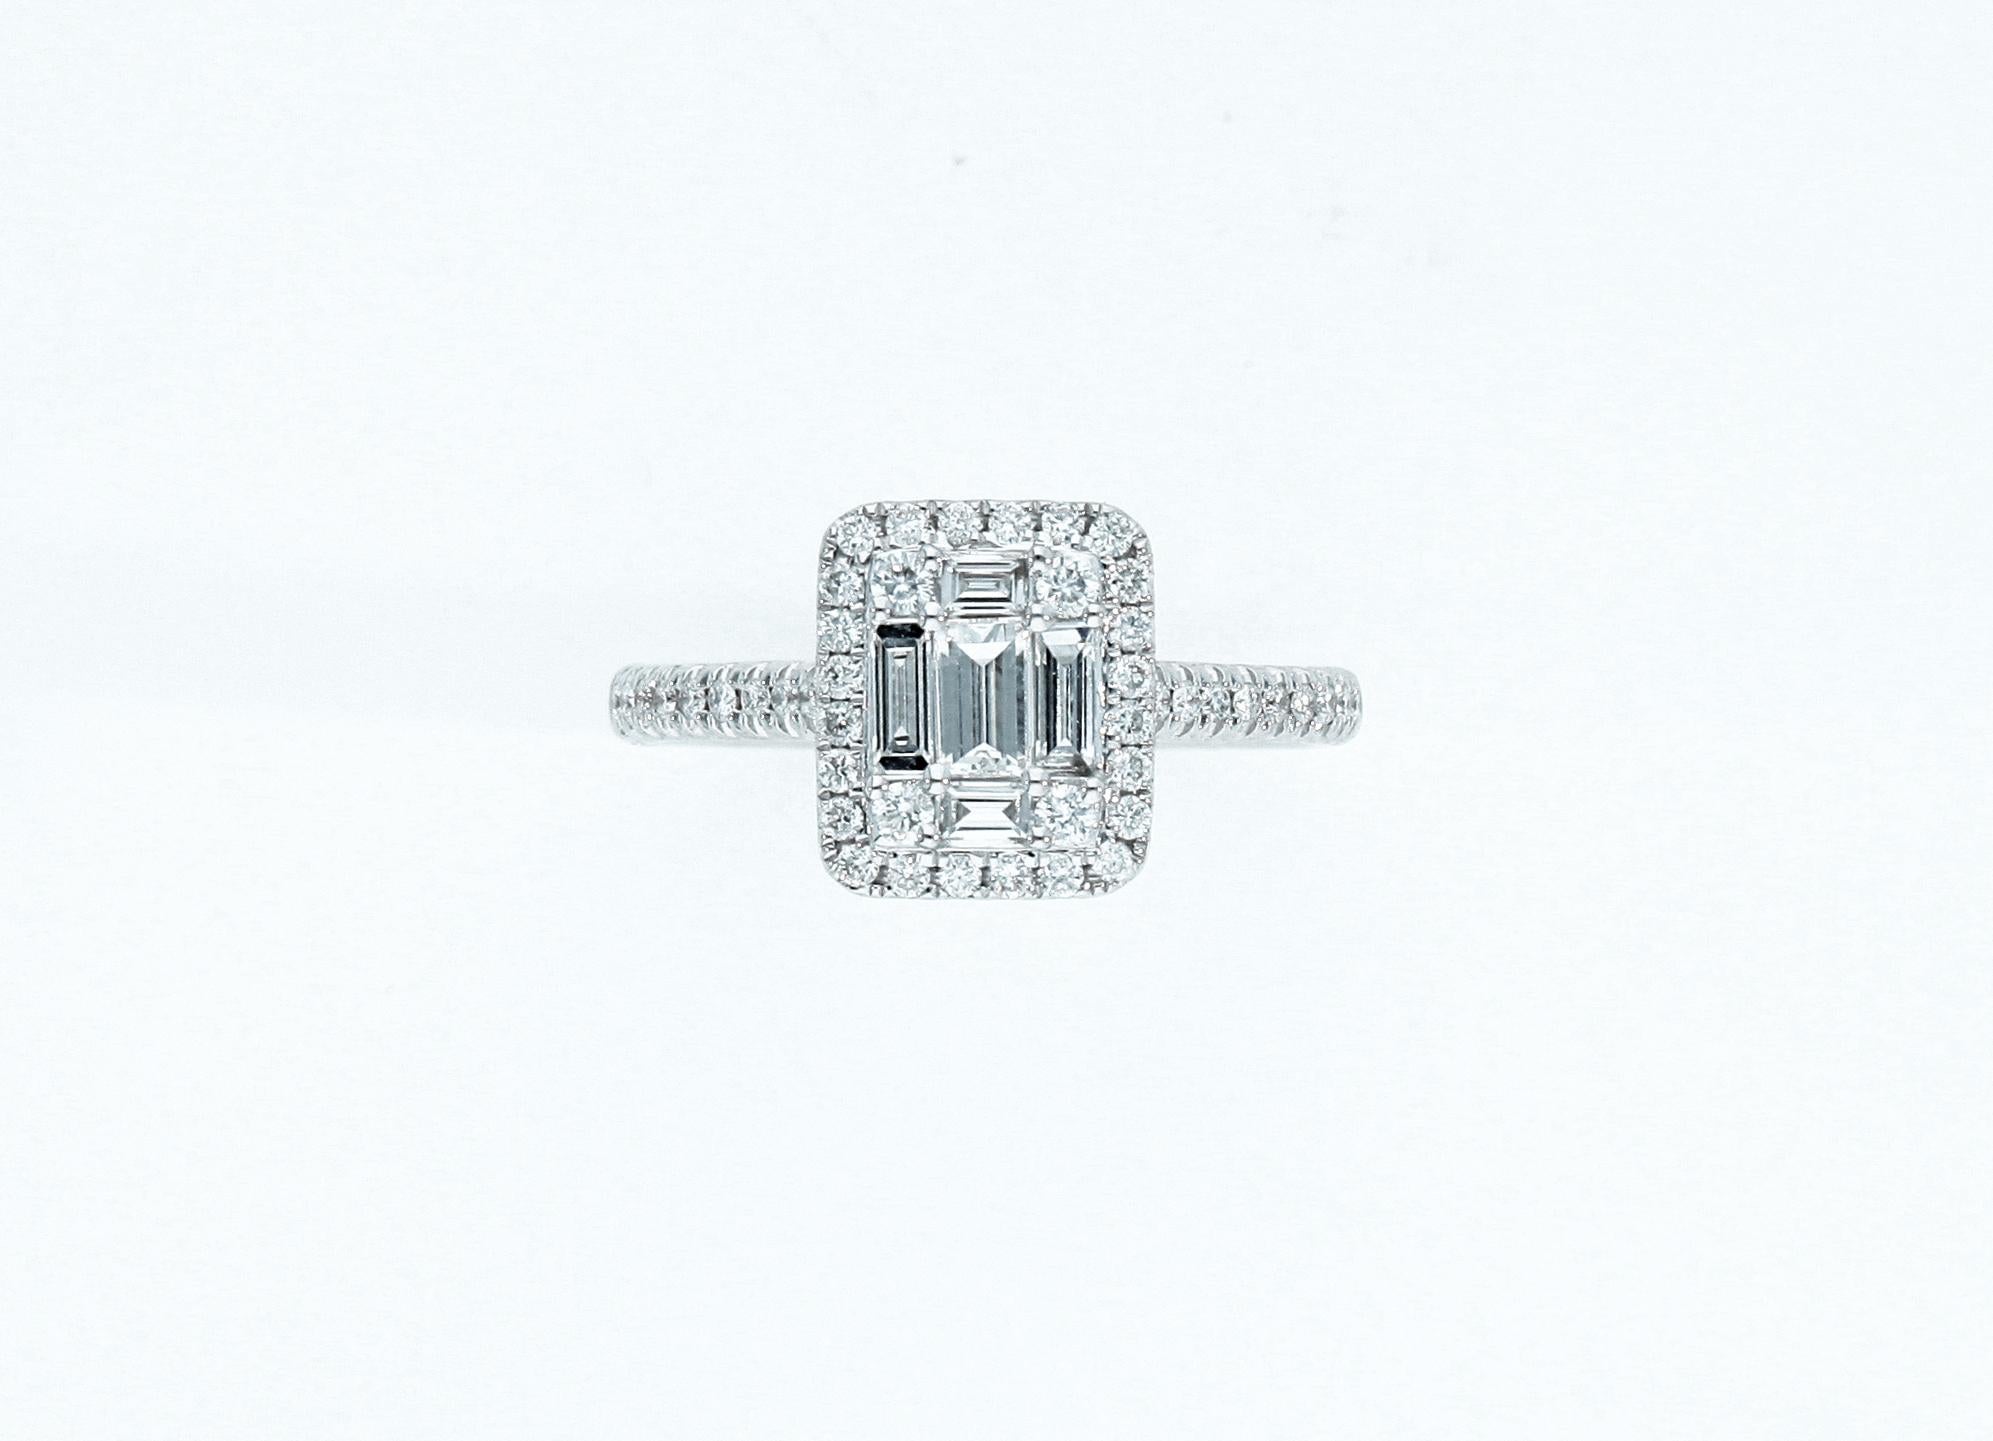 Baguette Cut Diamonds ct 0.72, Contemporary Engagement Ring Made in Italy For Sale